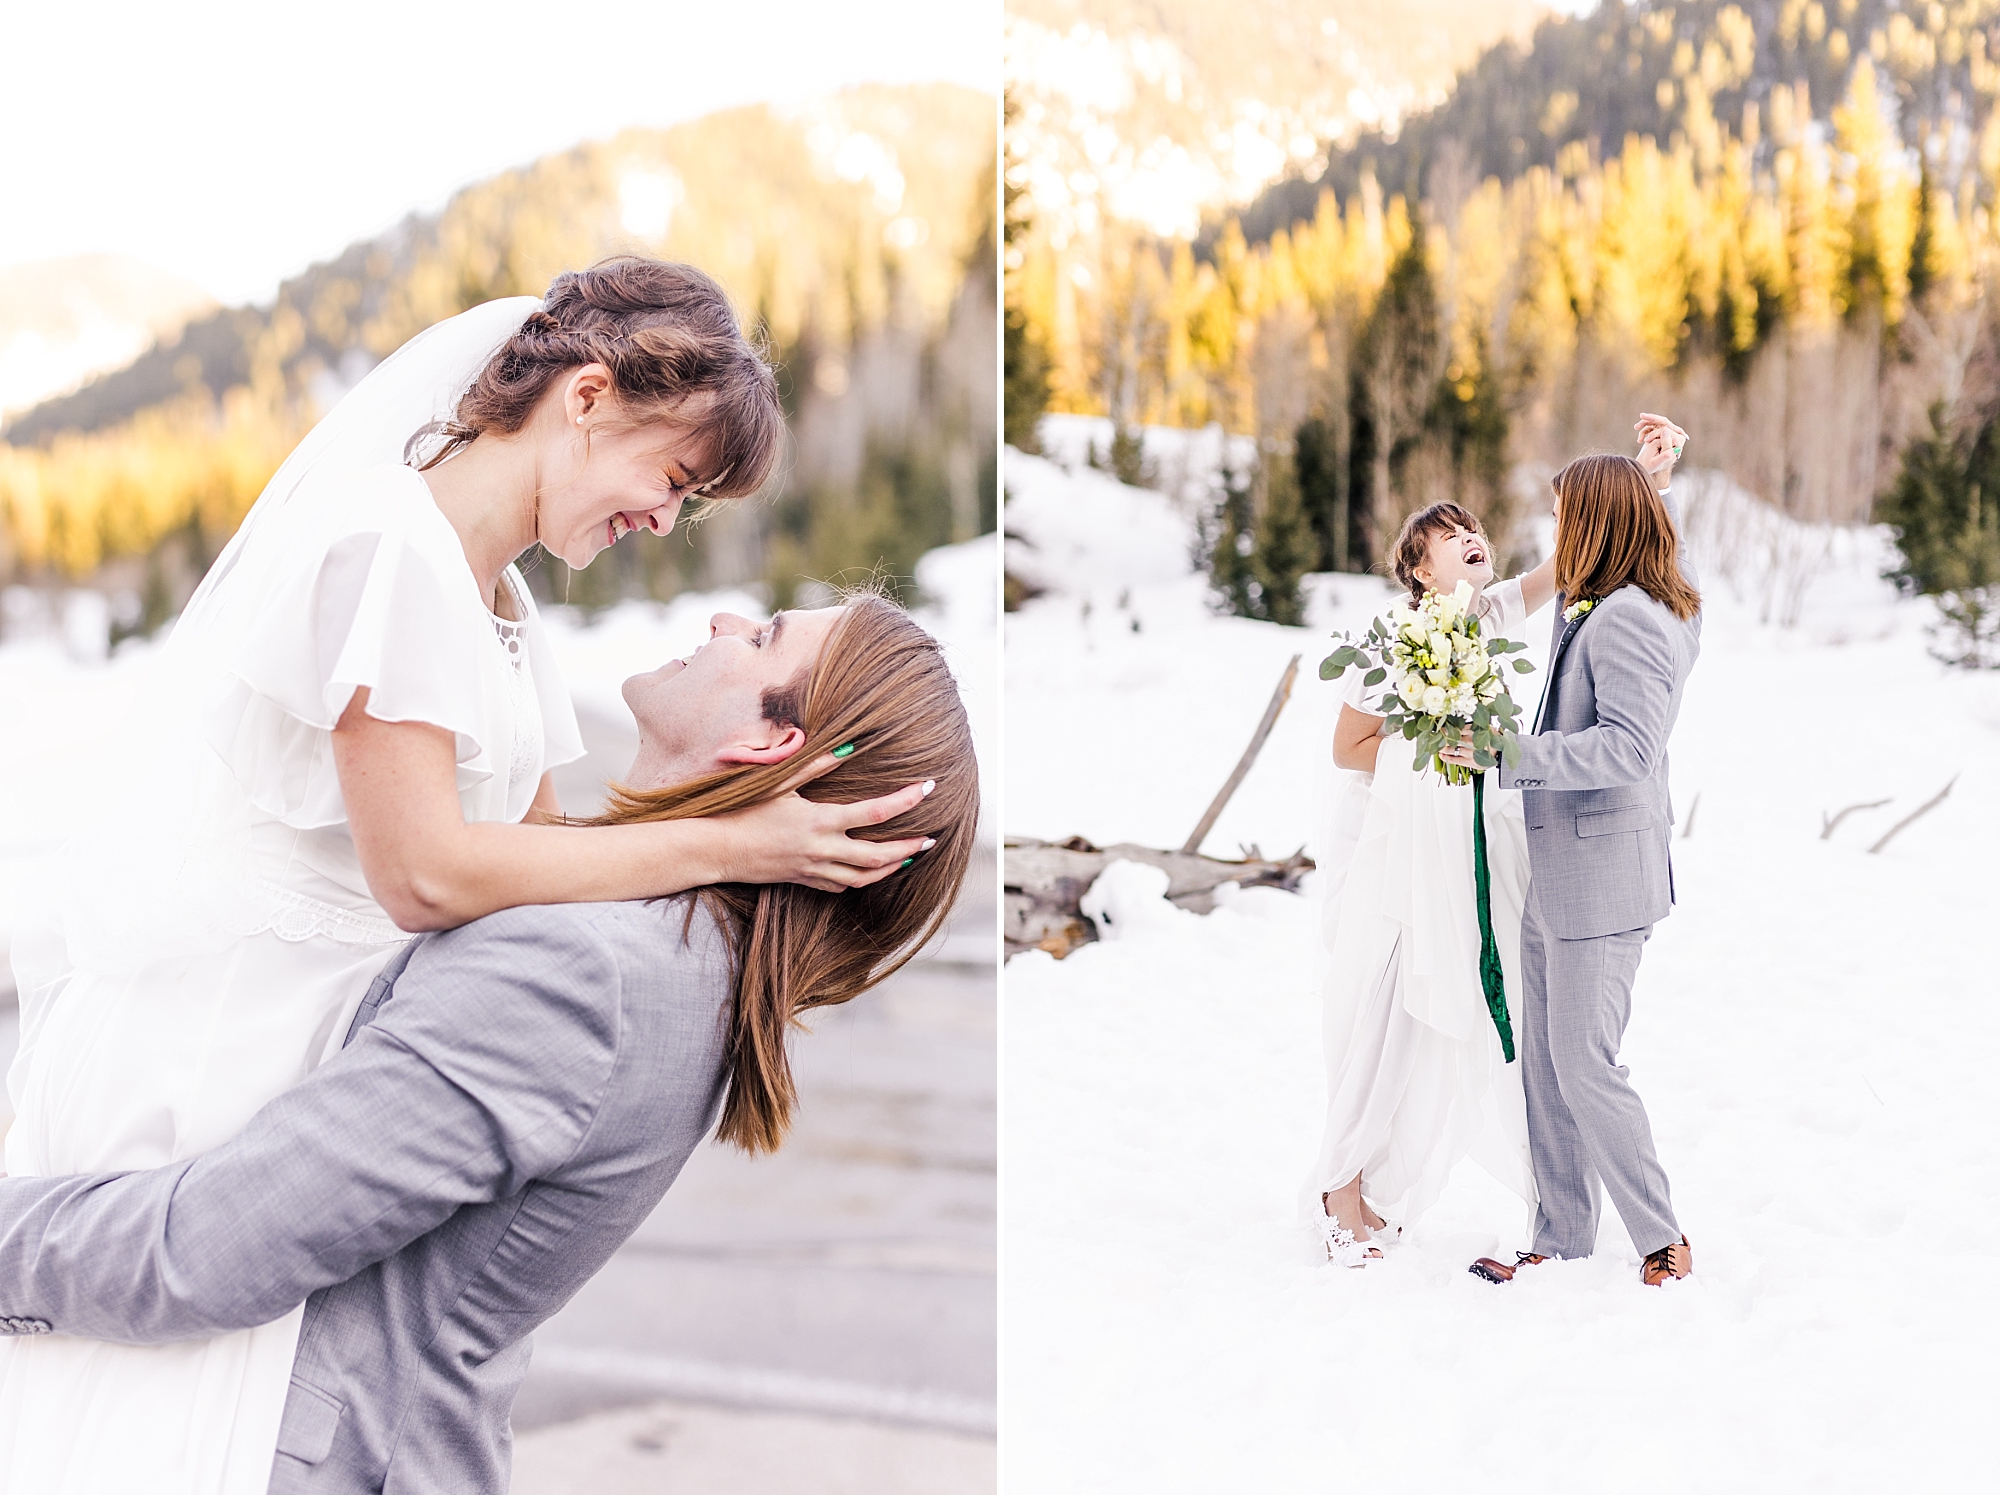 Fun and playful wedding formals in the Utah mountains